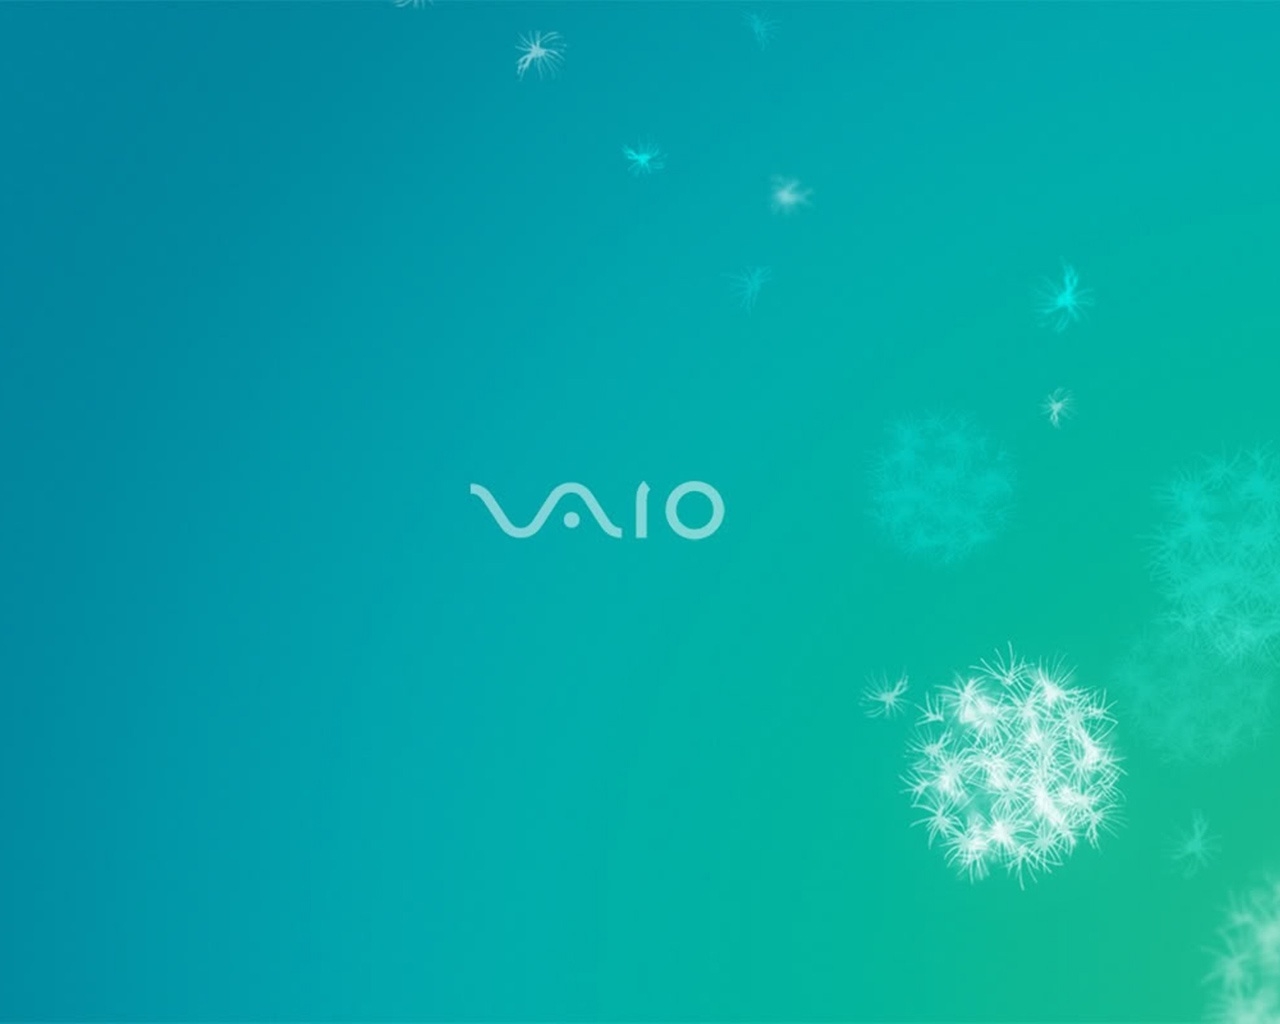 Sony VAIO Teal Whisper for 1280 x 1024 resolution